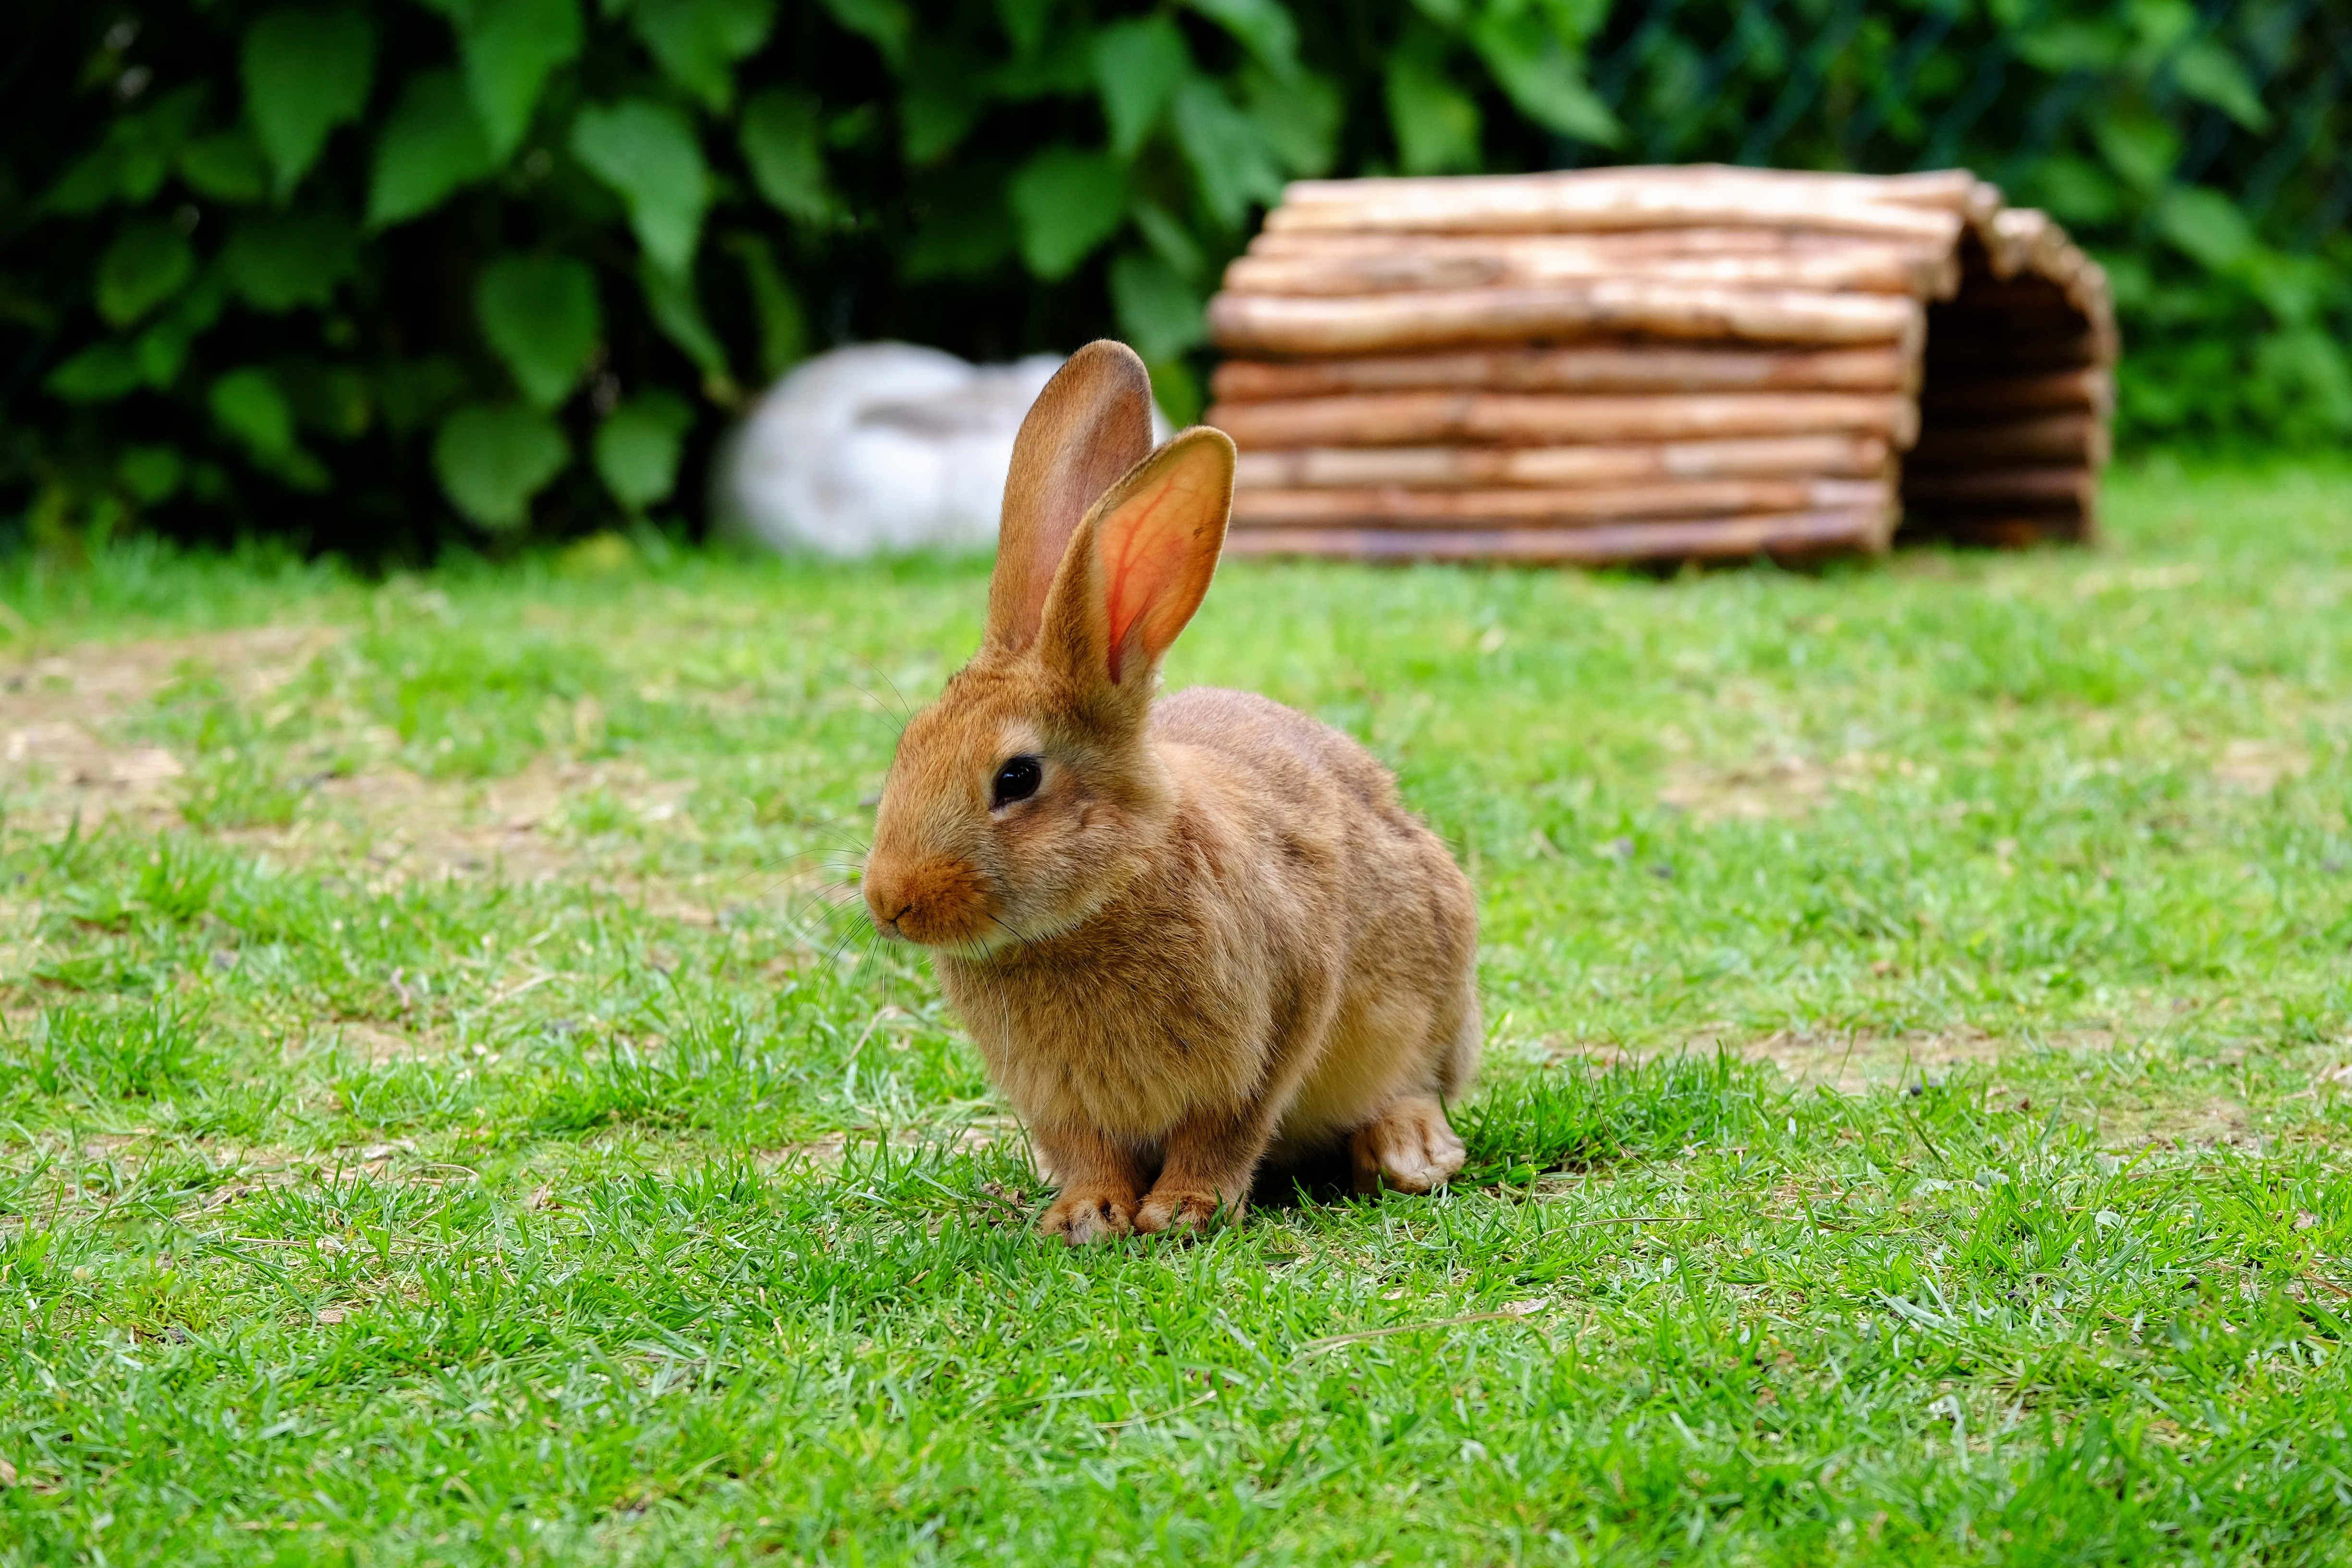 brown rabbit on grass, wooden hutch in the background